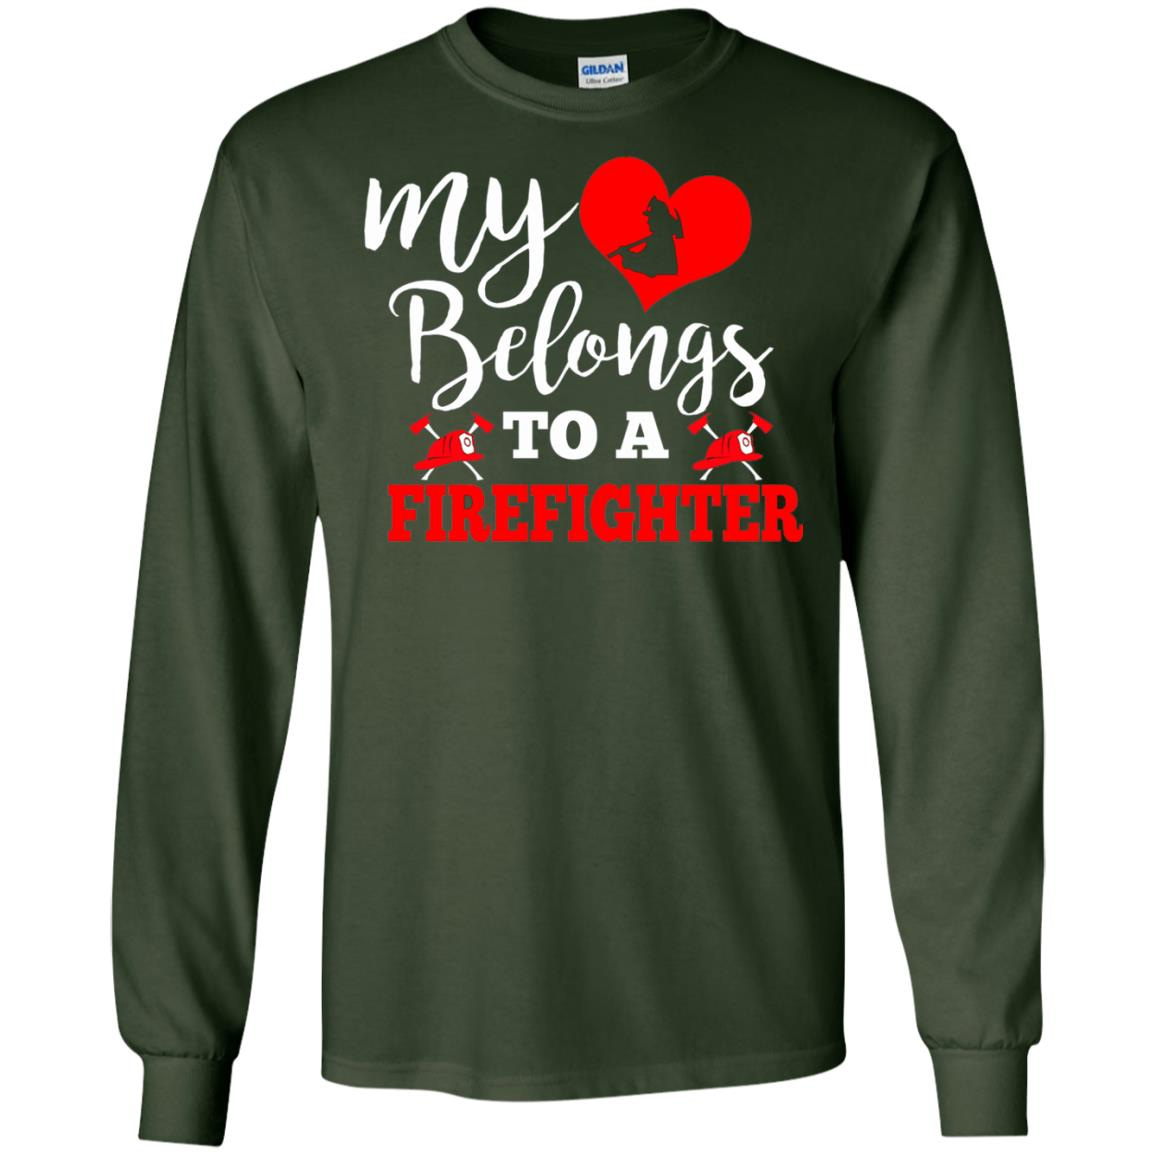 Inktee Store - Meaning Costume From Firefighter Husband For Wife Long Sleeve T-Shirt Image